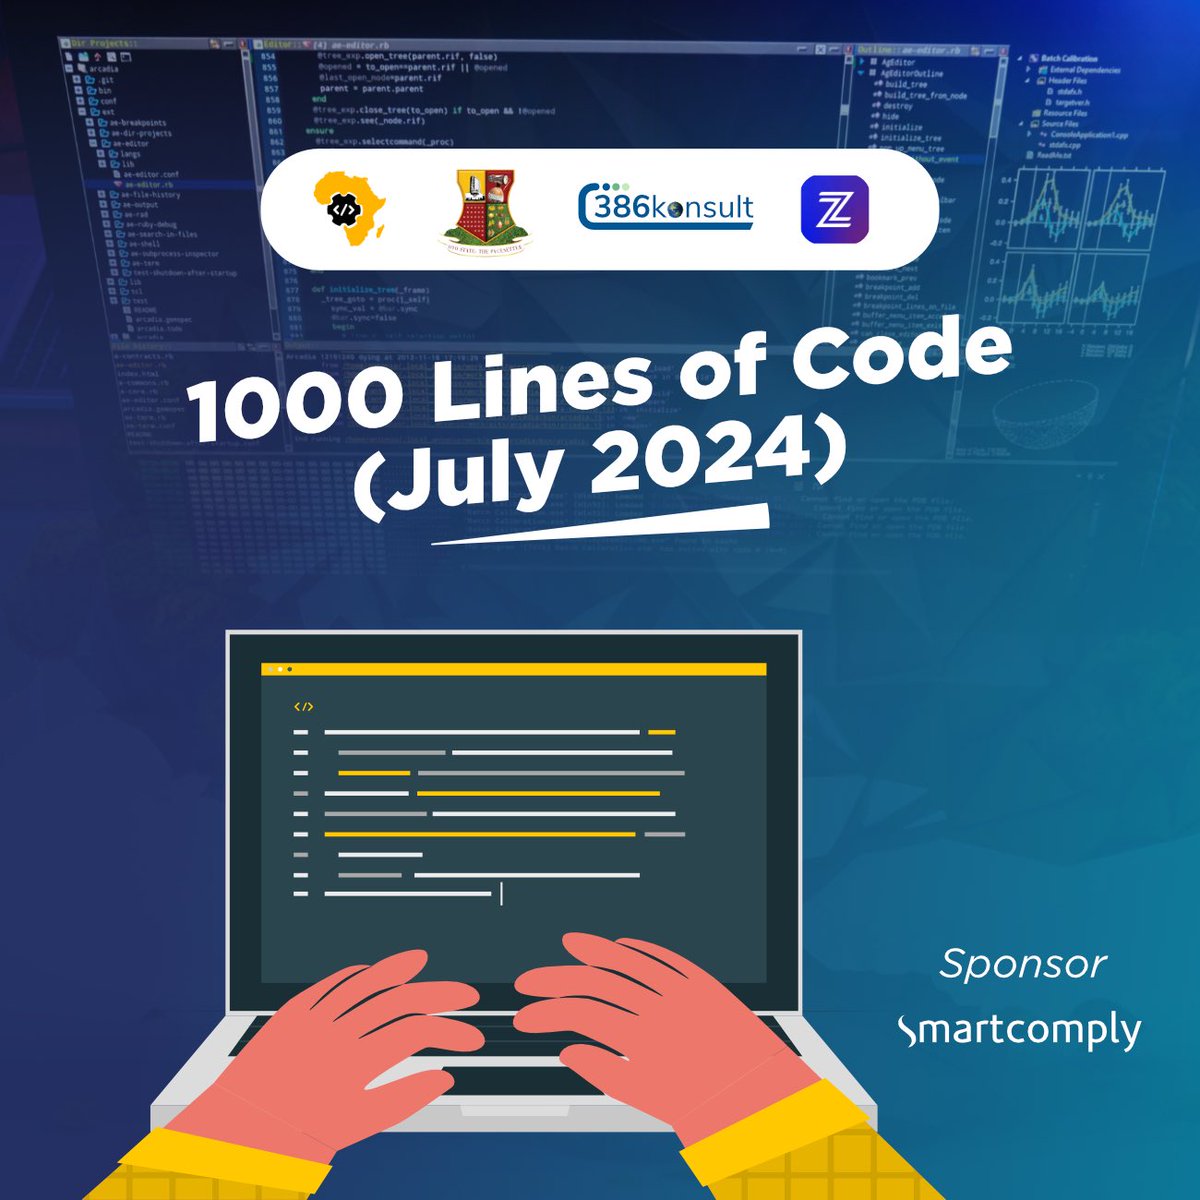 We're thrilled to announce that @smartcomplyapp  is joining forces with us, @CodegarageA, the @oyostategovt , and @zeeh_africa , as sponsor for the #1000LinesofCodes initiative happening July 2024!

#1000LinesofCode #CodeGarageAfrica #OyoState #386konsult #Smartcomply #TechEdu